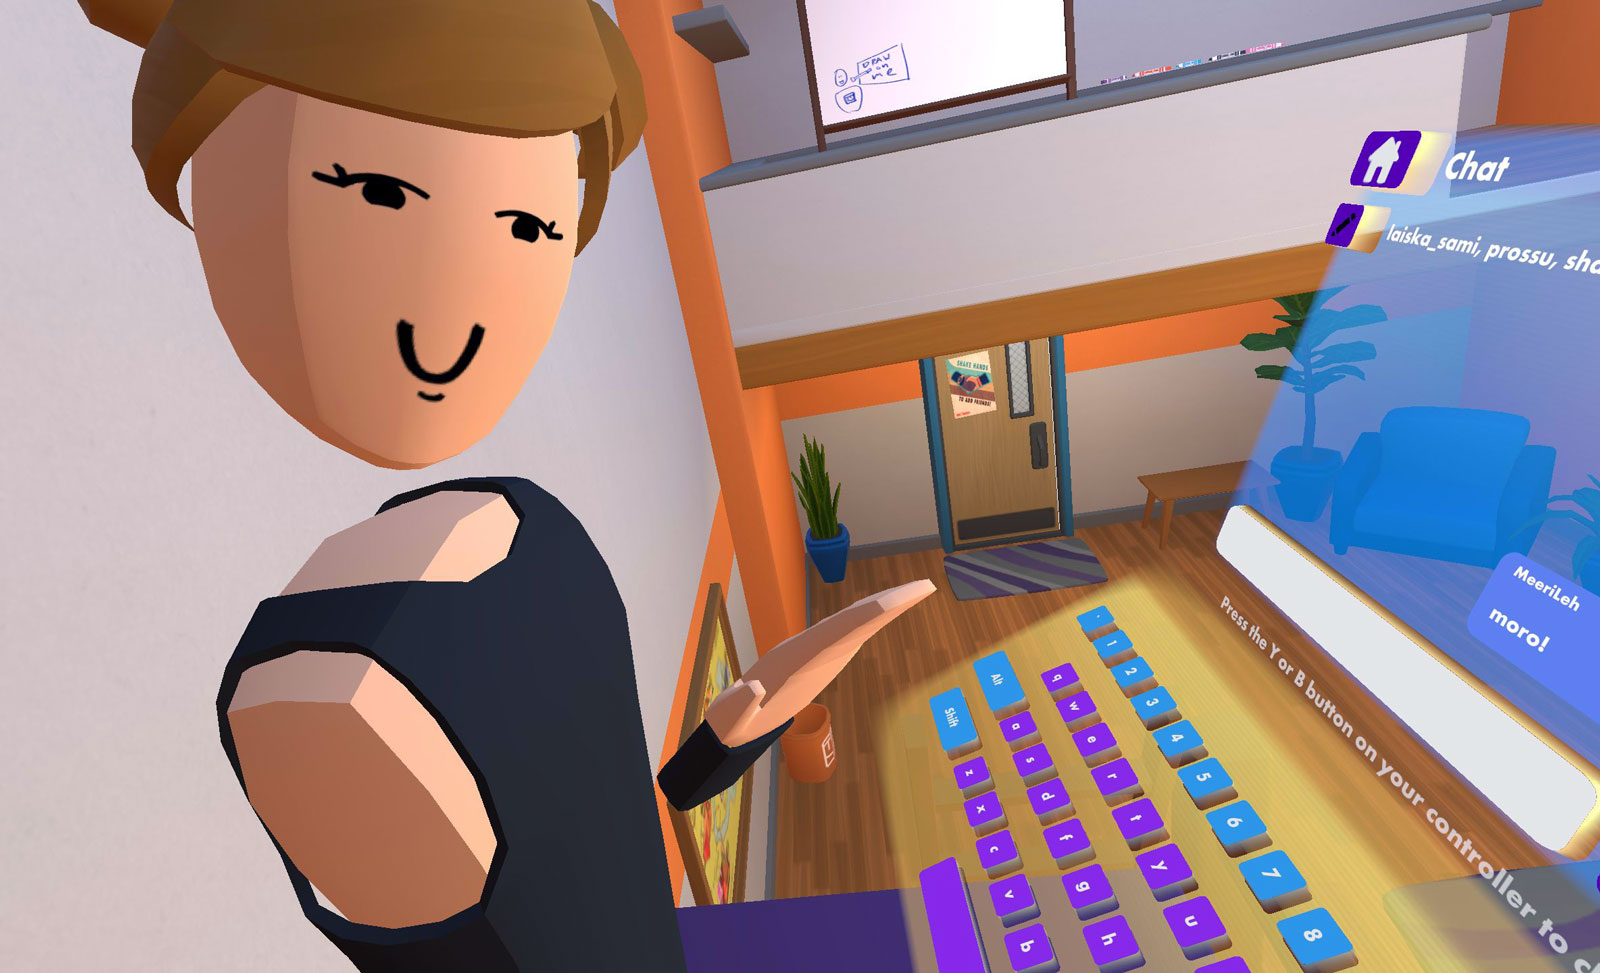 A selfie screenshot taken in the Rec Room virtual reality platform. An avatar is chatting on laptop.